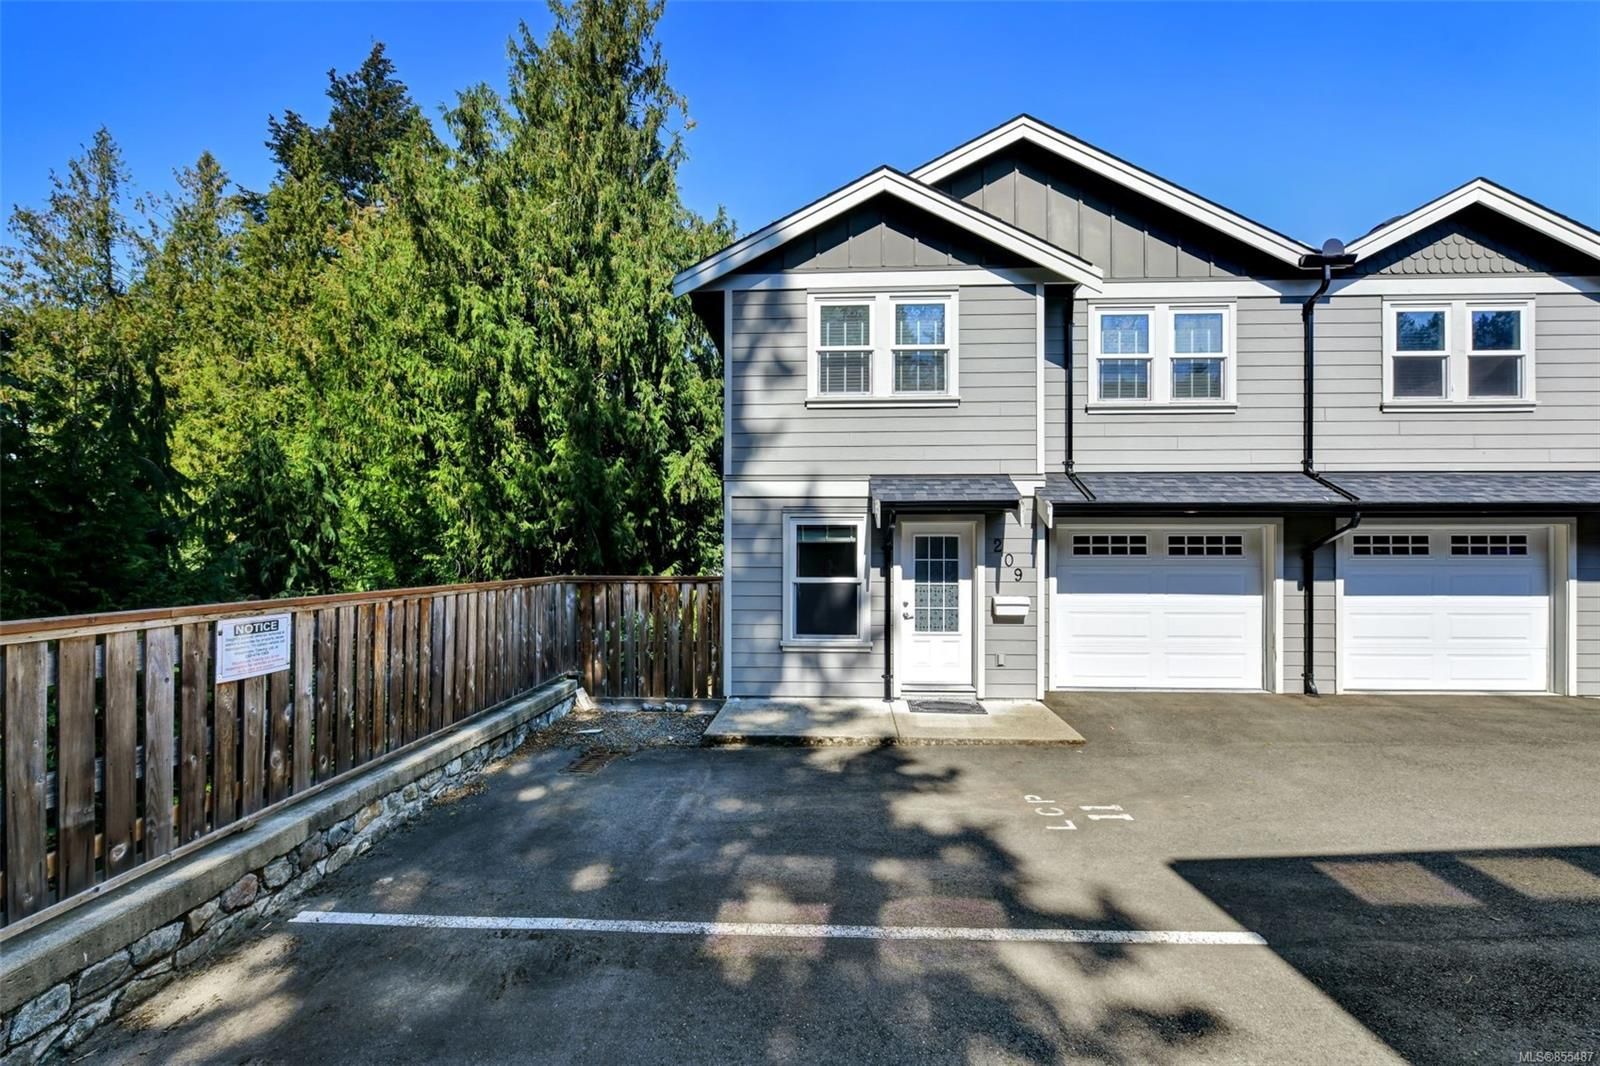 I have sold a property at 209 954 Walfred Rd in Langford
